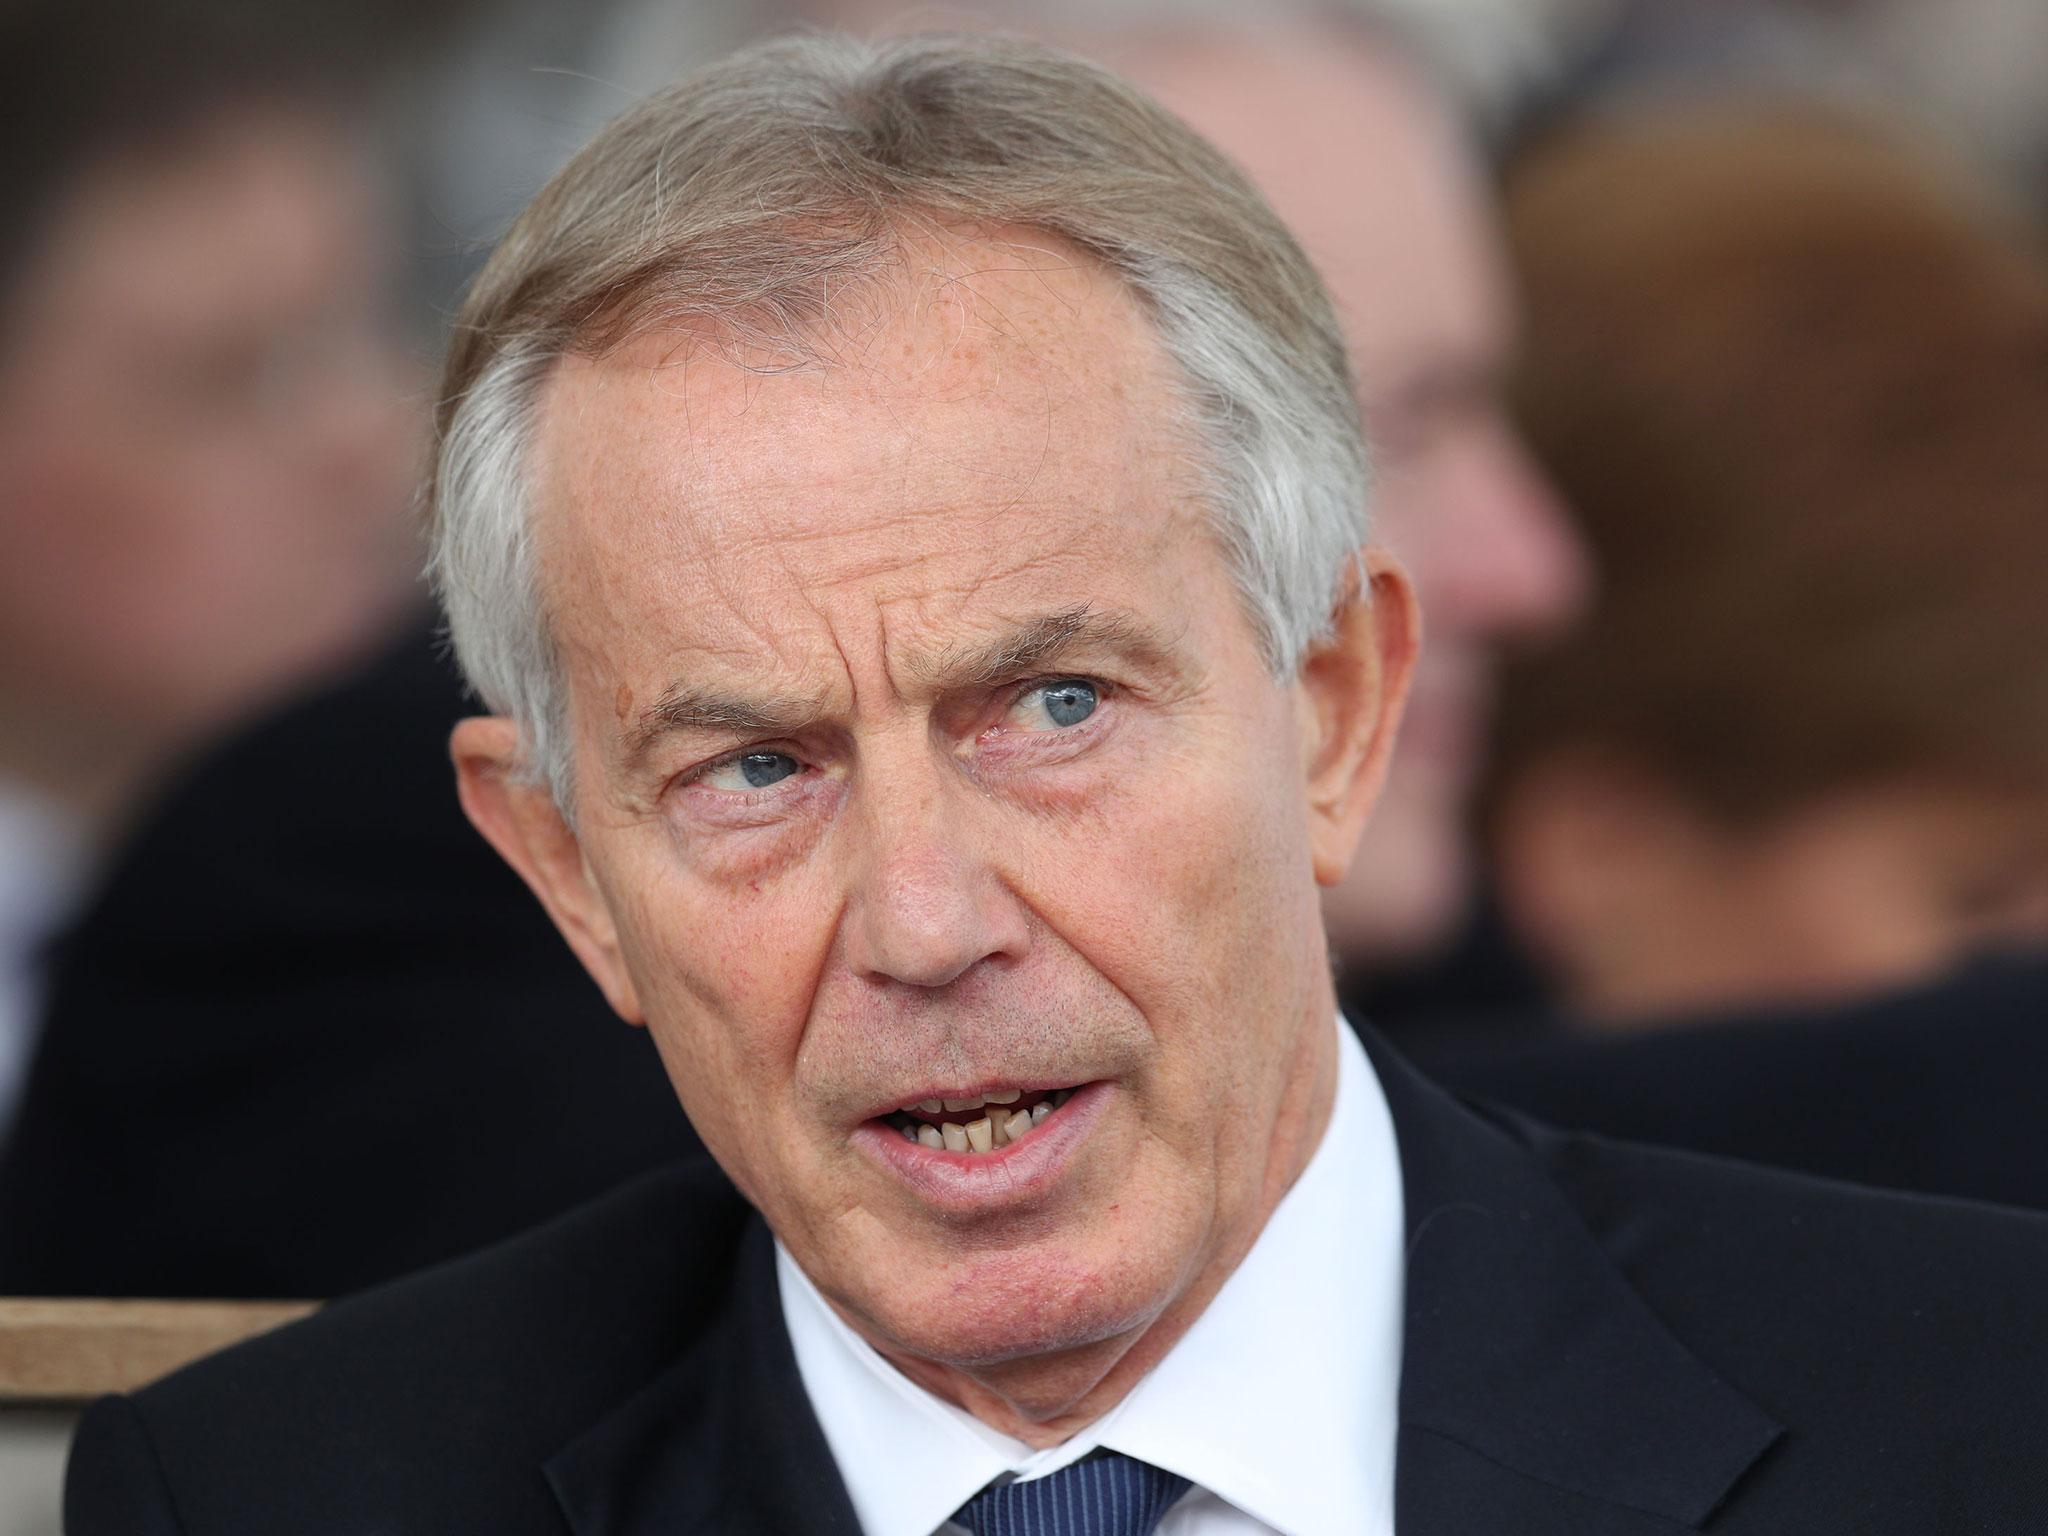 The Attorney General has said Mr Blair cannot be charged for a ‘crime of aggression’ because there is no such thing under UK law